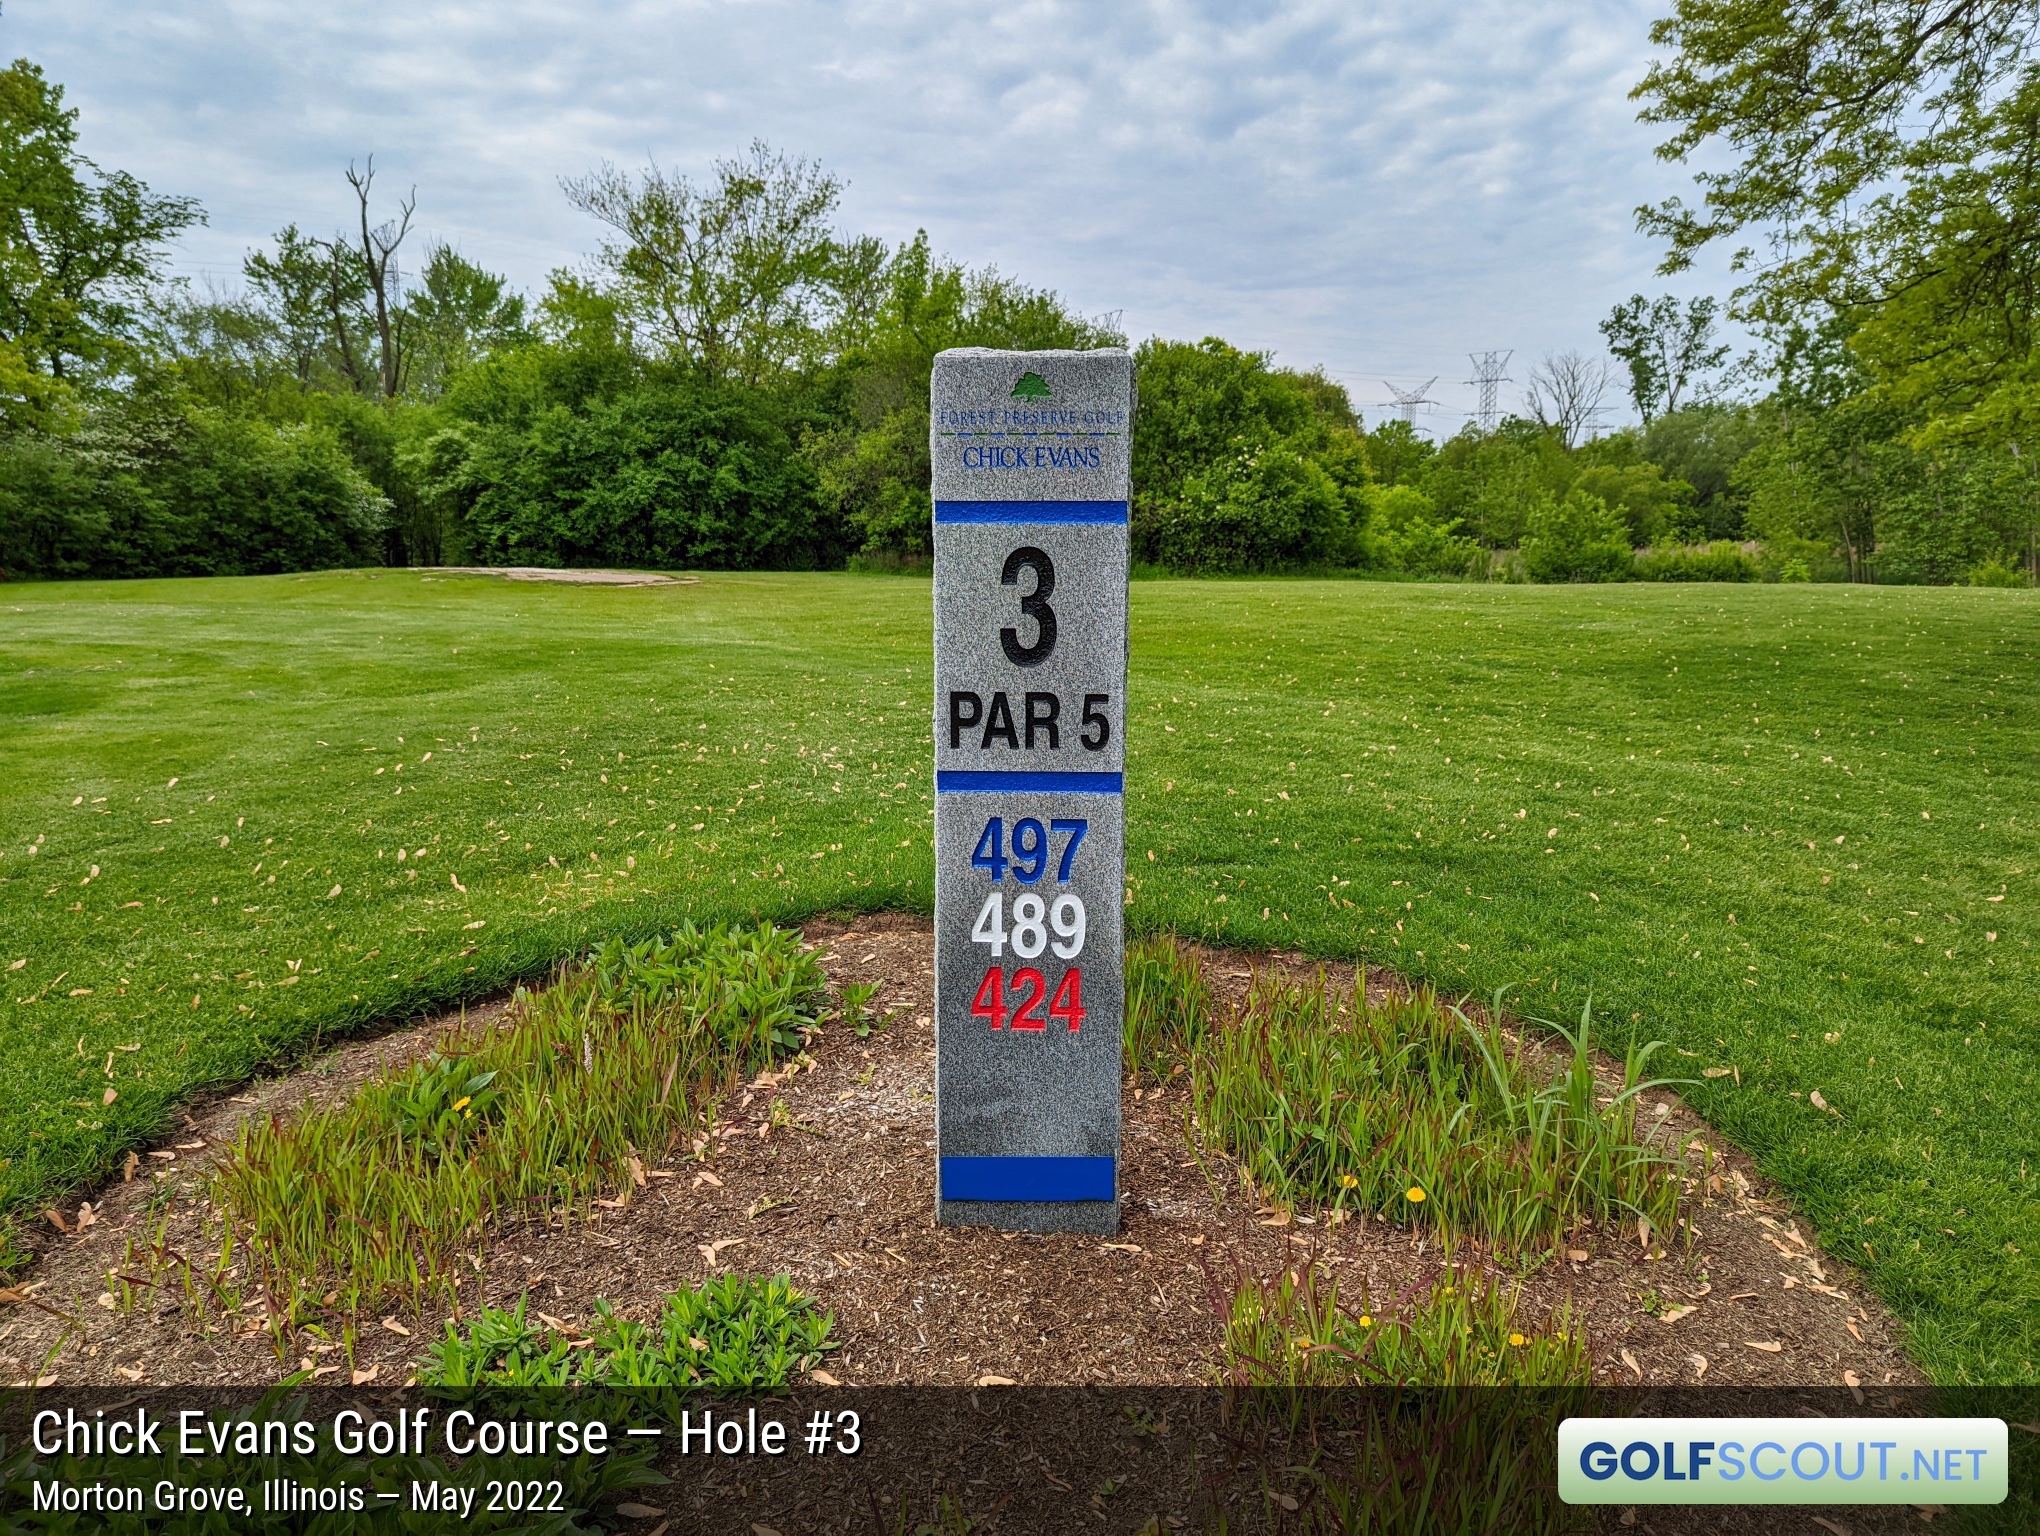 Photo of hole #3 at Chick Evans Golf Course in Morton Grove, Illinois. 